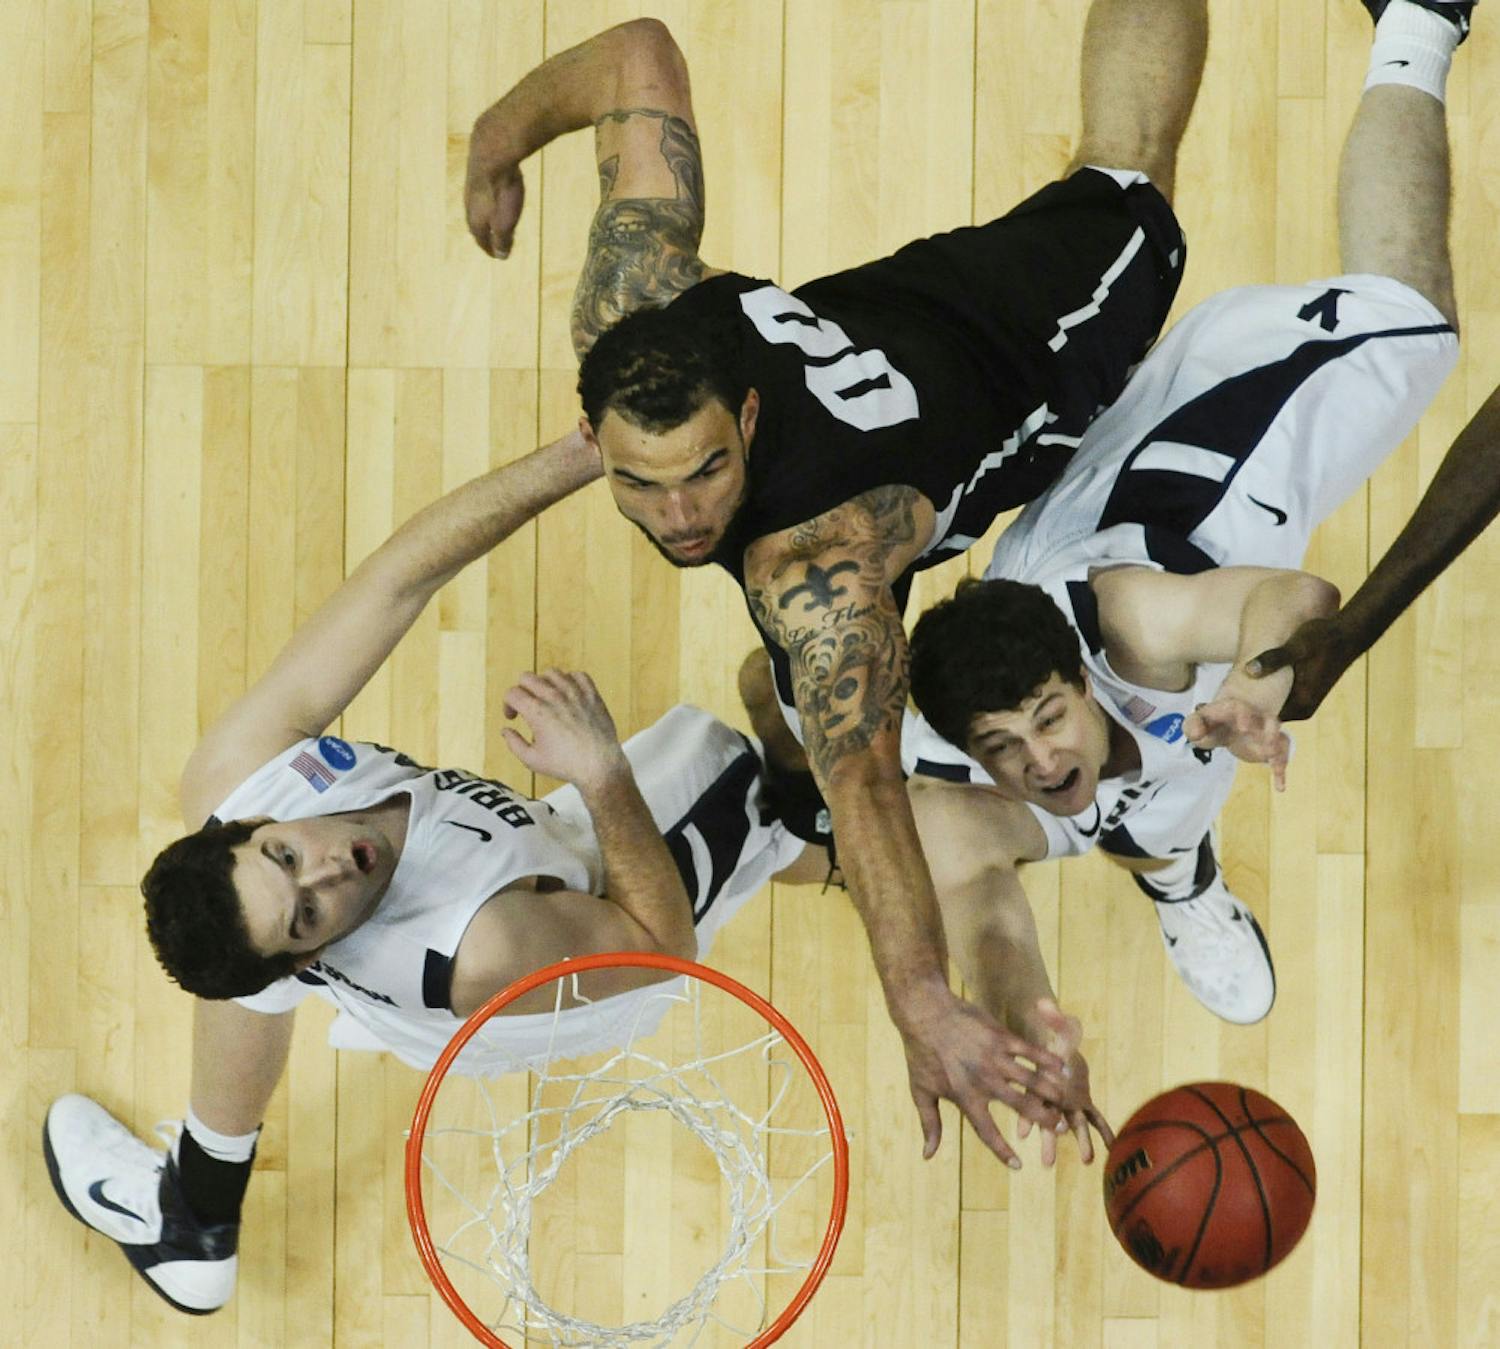 BYU's Jimmer Fredette, right, puts up a shot against Gonzaga's Robert Sacre, center, as Logan Magnusson looks on in the second half of a Southeast regional third round NCAA tournament college basketball game, Saturday, March 19, 2011, in Denver. (AP Photo/Jack Dempsey)